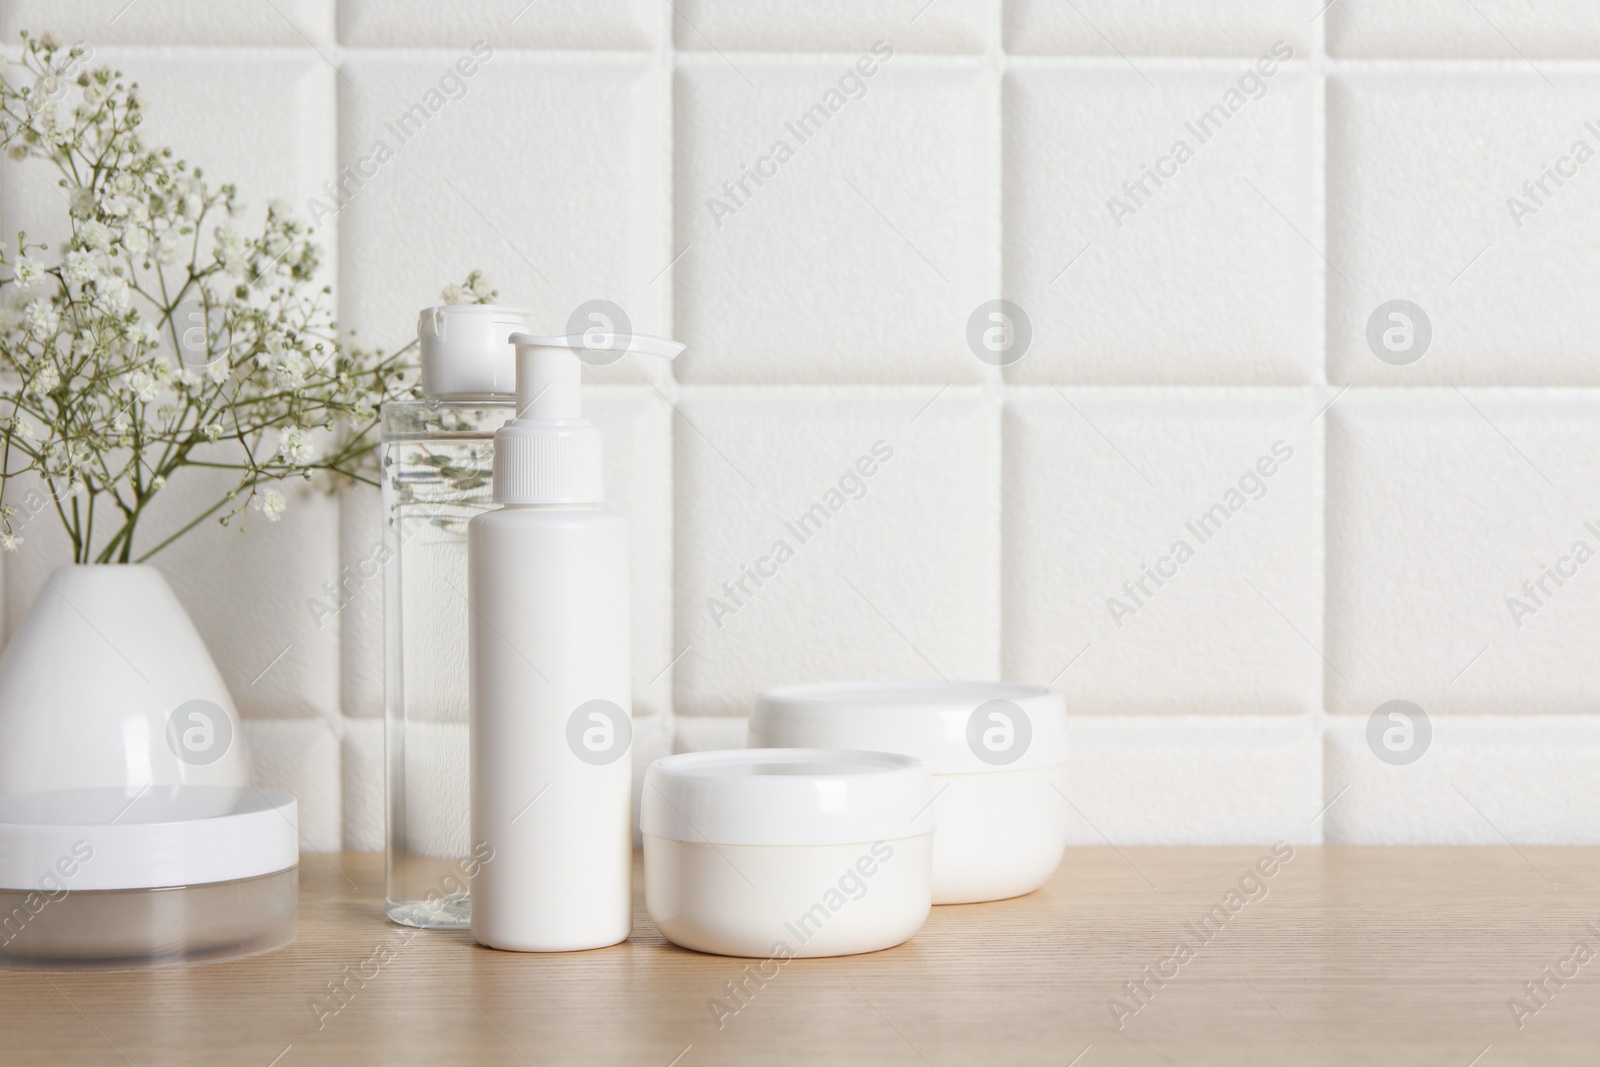 Photo of Bath accessories. Different personal care products and gypsophila flowers in vase on wooden table near white tiled wall, space for text